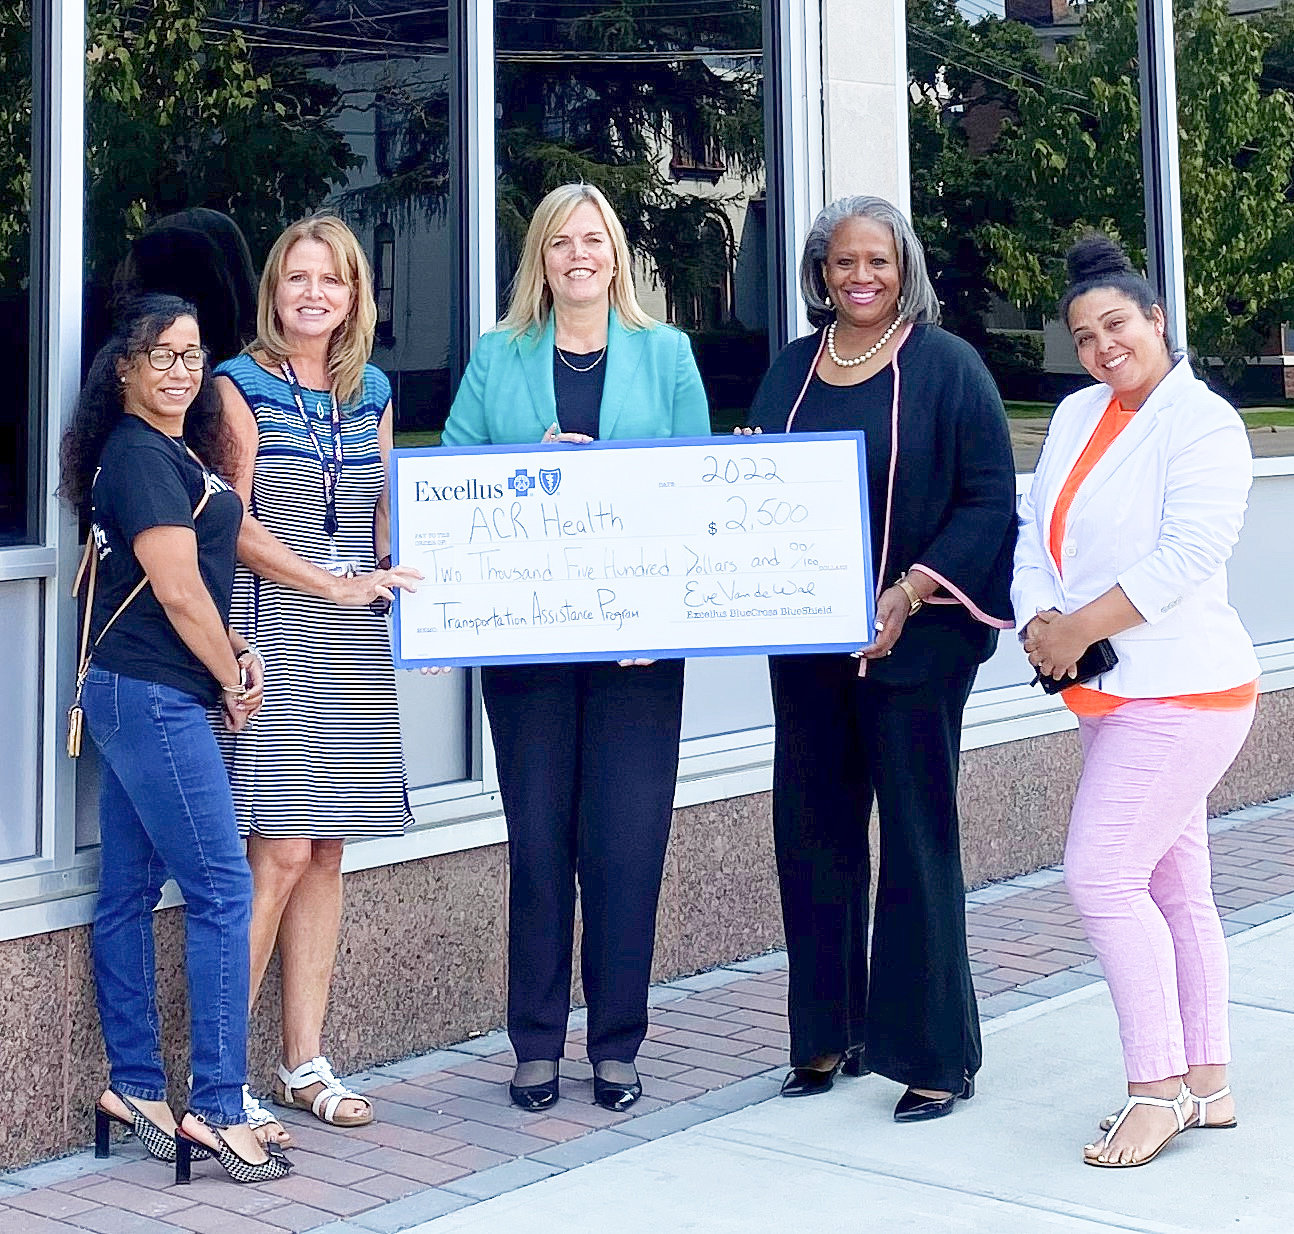 ACR Health Women’s Linkage Specialist Alysia Johnson, left, Director of Development and Community Engagement Mary Beth Anderson, Excellus BCBS Regional President Eve Van de Wal, ACR Health Executive Director Lisa D. Alford and ACR Health Prevention CJI Supervisor Wendy Grullon gather together for a check presentation.